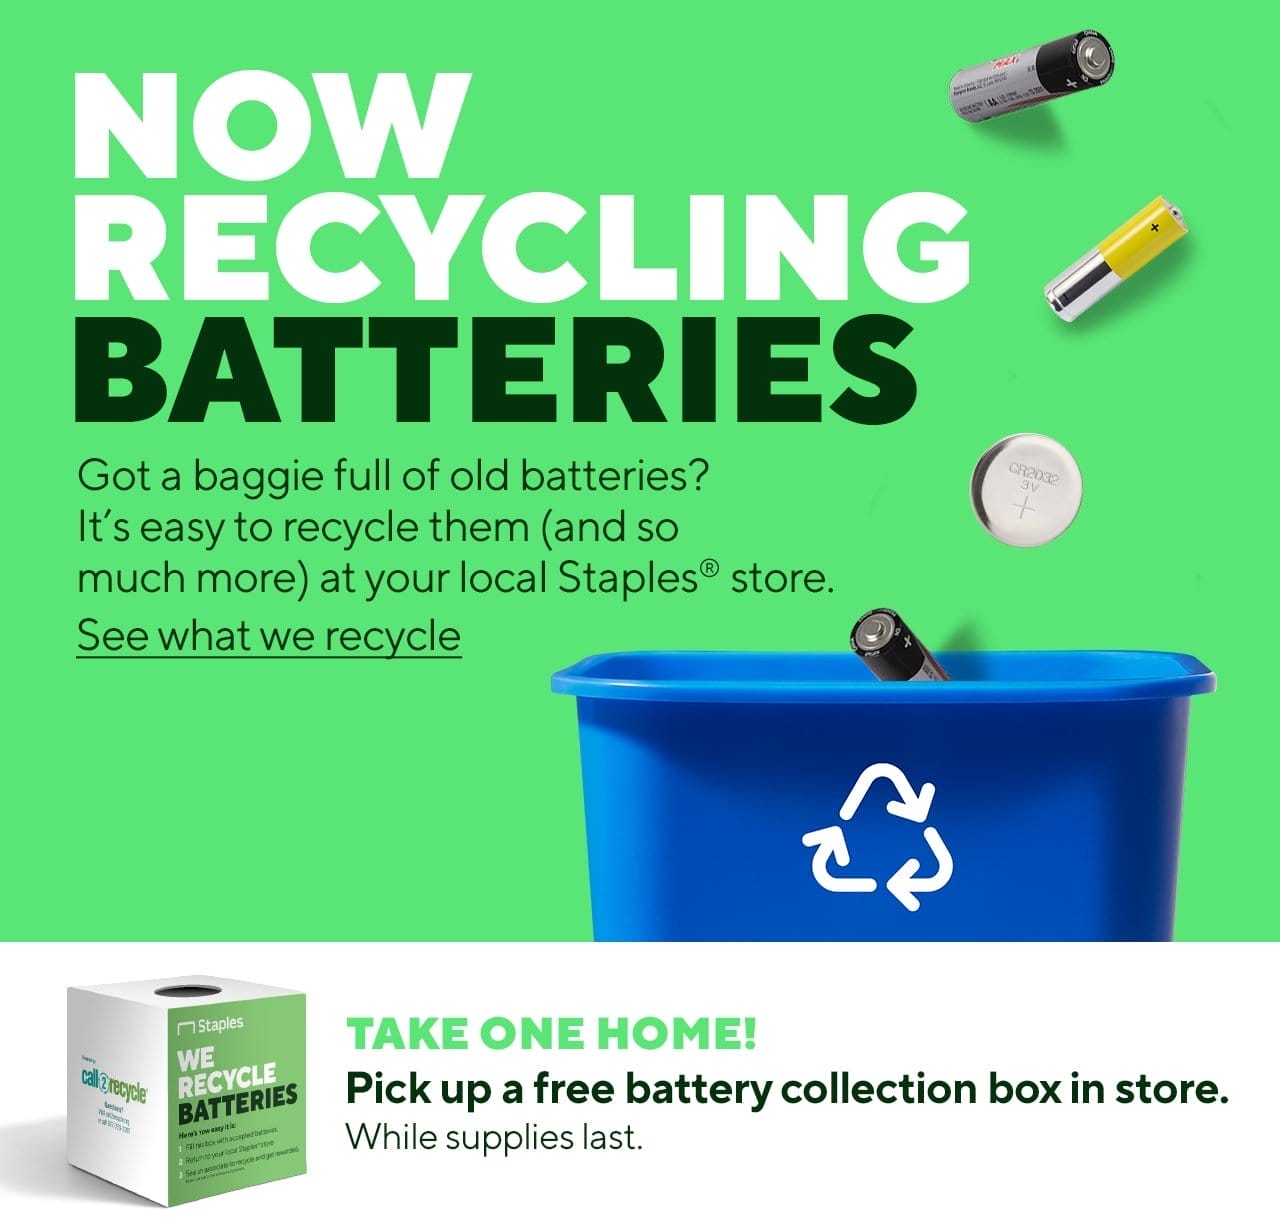 Now Recycling Batteries